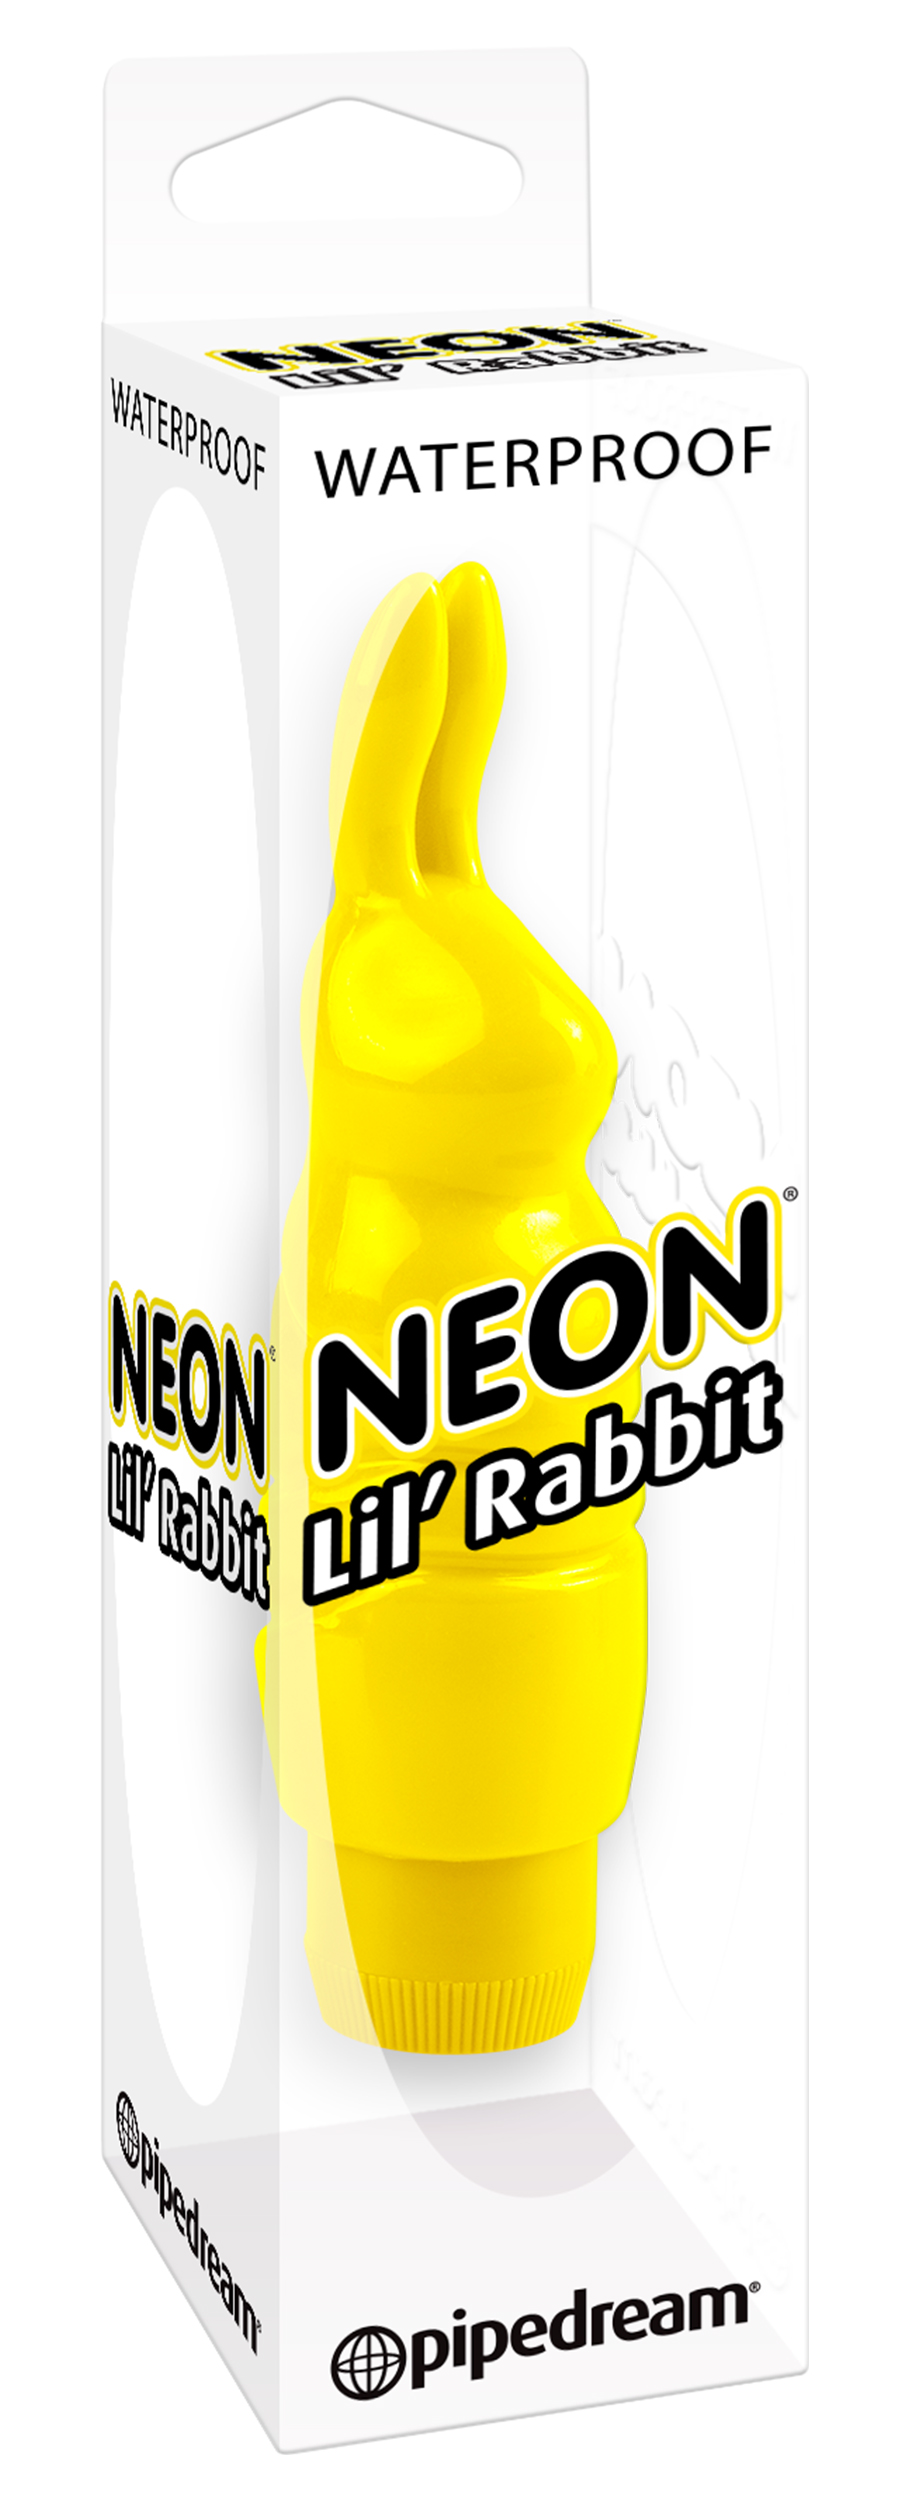 Neon luv touch LIL rabbit yellow - PD141718.